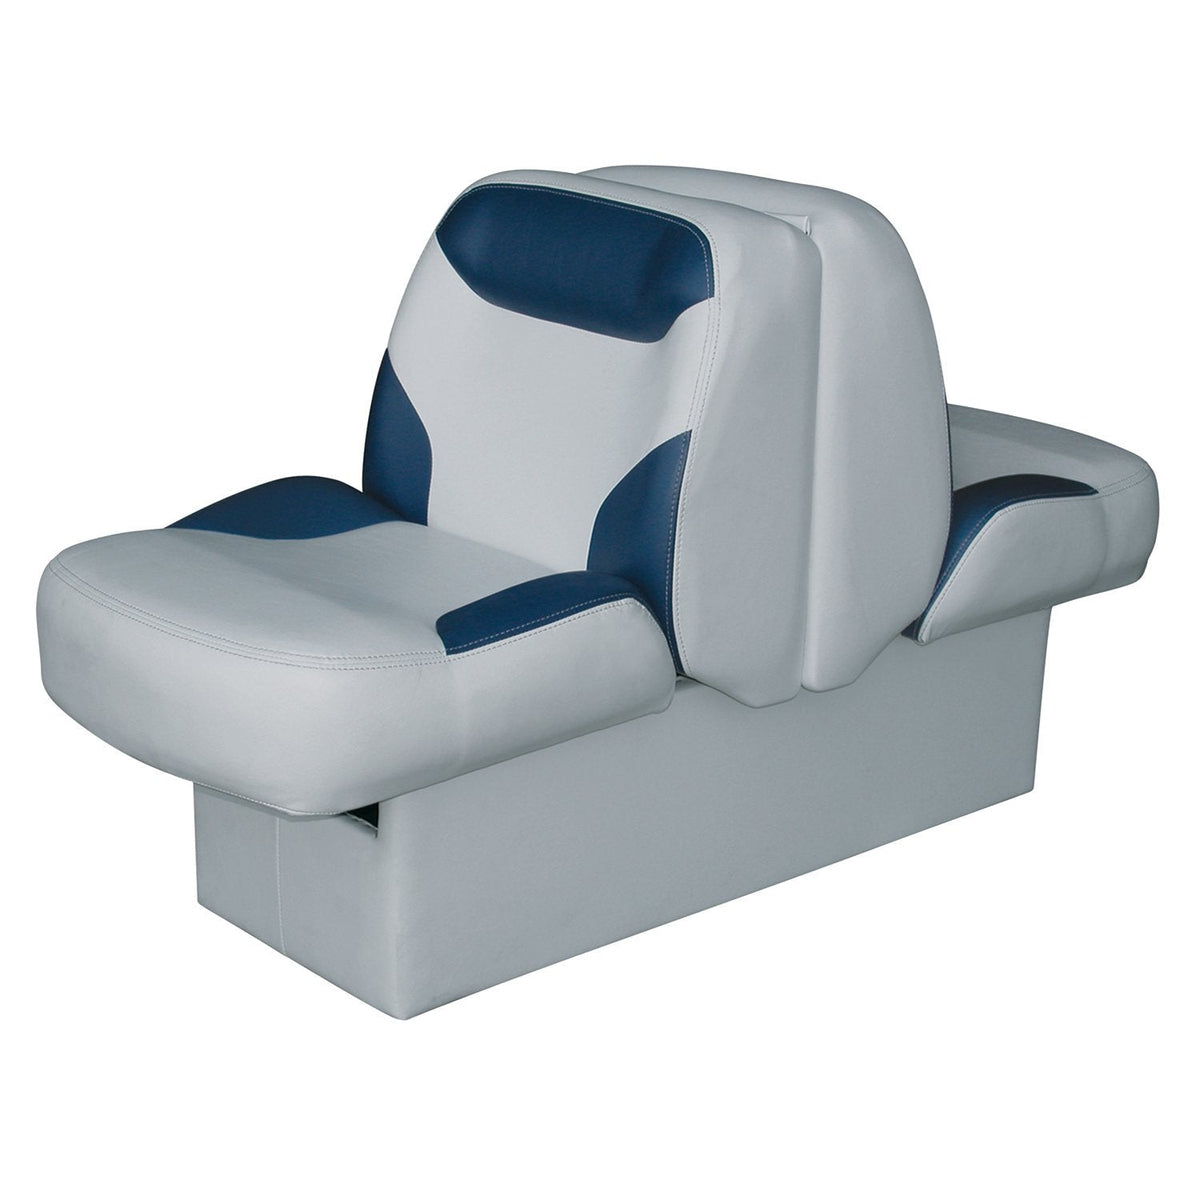 Wise Oversized - Not Qualified for Free Shipping Wise Capri/Classic B-to-B Seat Gray/Blue #8WD1225-0034